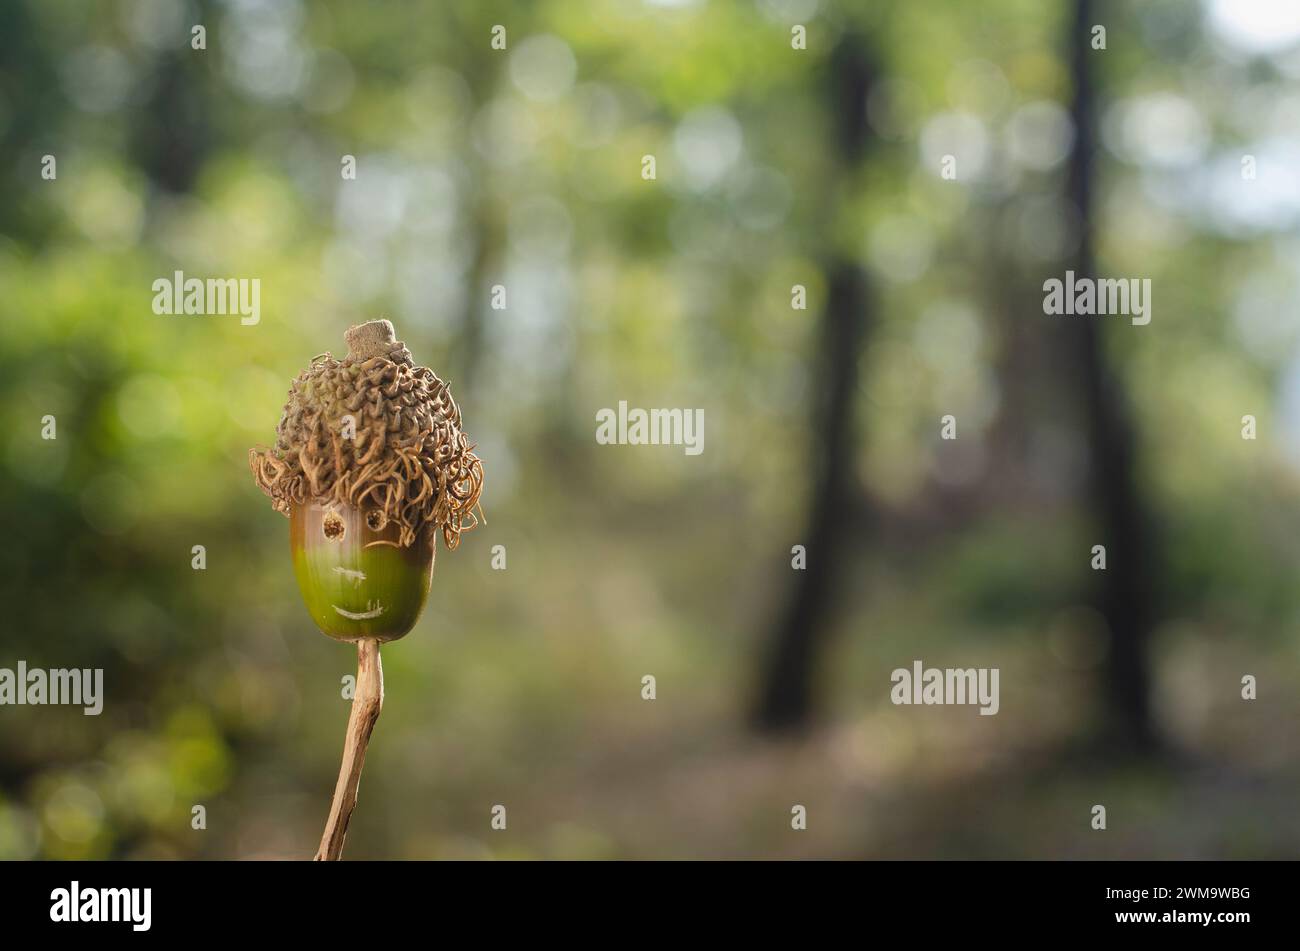 abstract background, little acorn man, smiling on blurred background Stock Photo